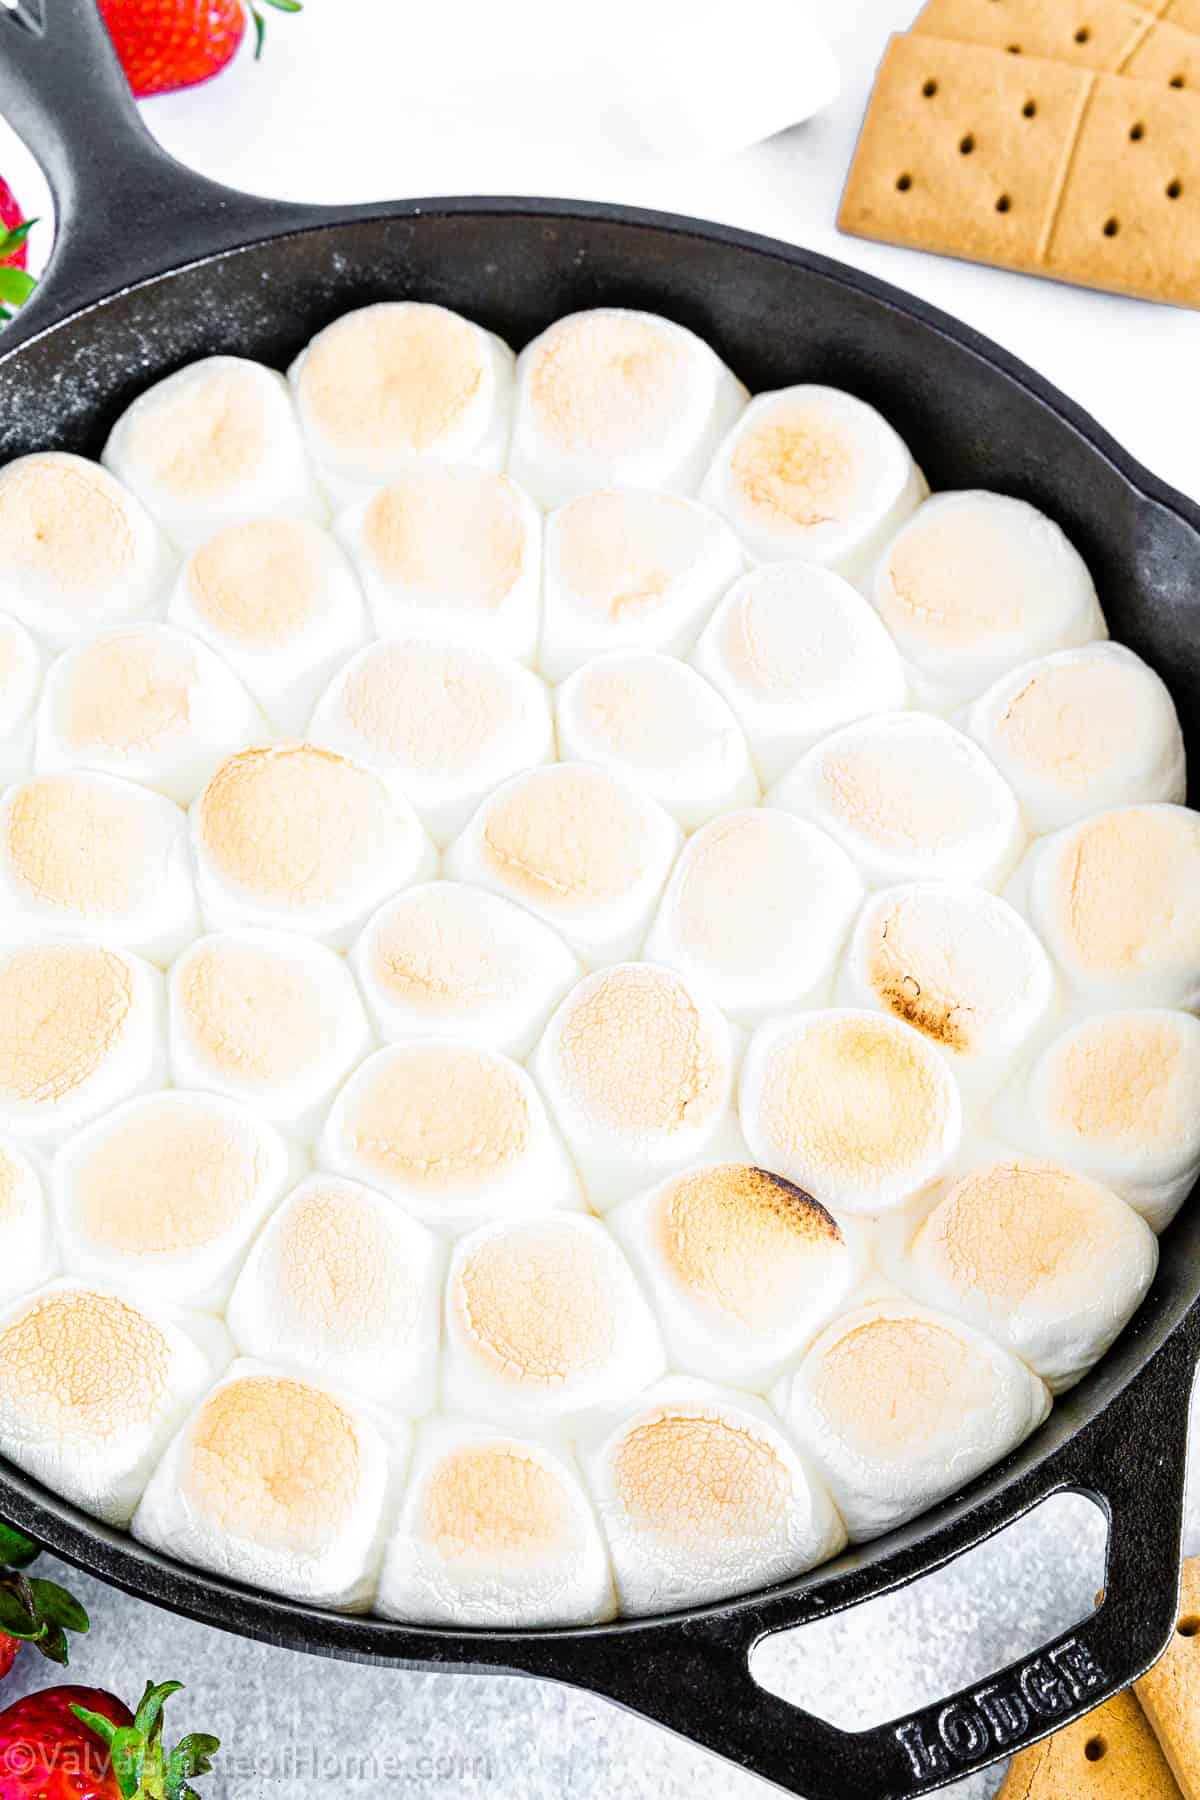 S'mores dip is an excellent dessert alternative for gatherings, parties, or any other occasion where you want to indulge in the comforting flavors of s'mores in a more portable and sharing fashion.